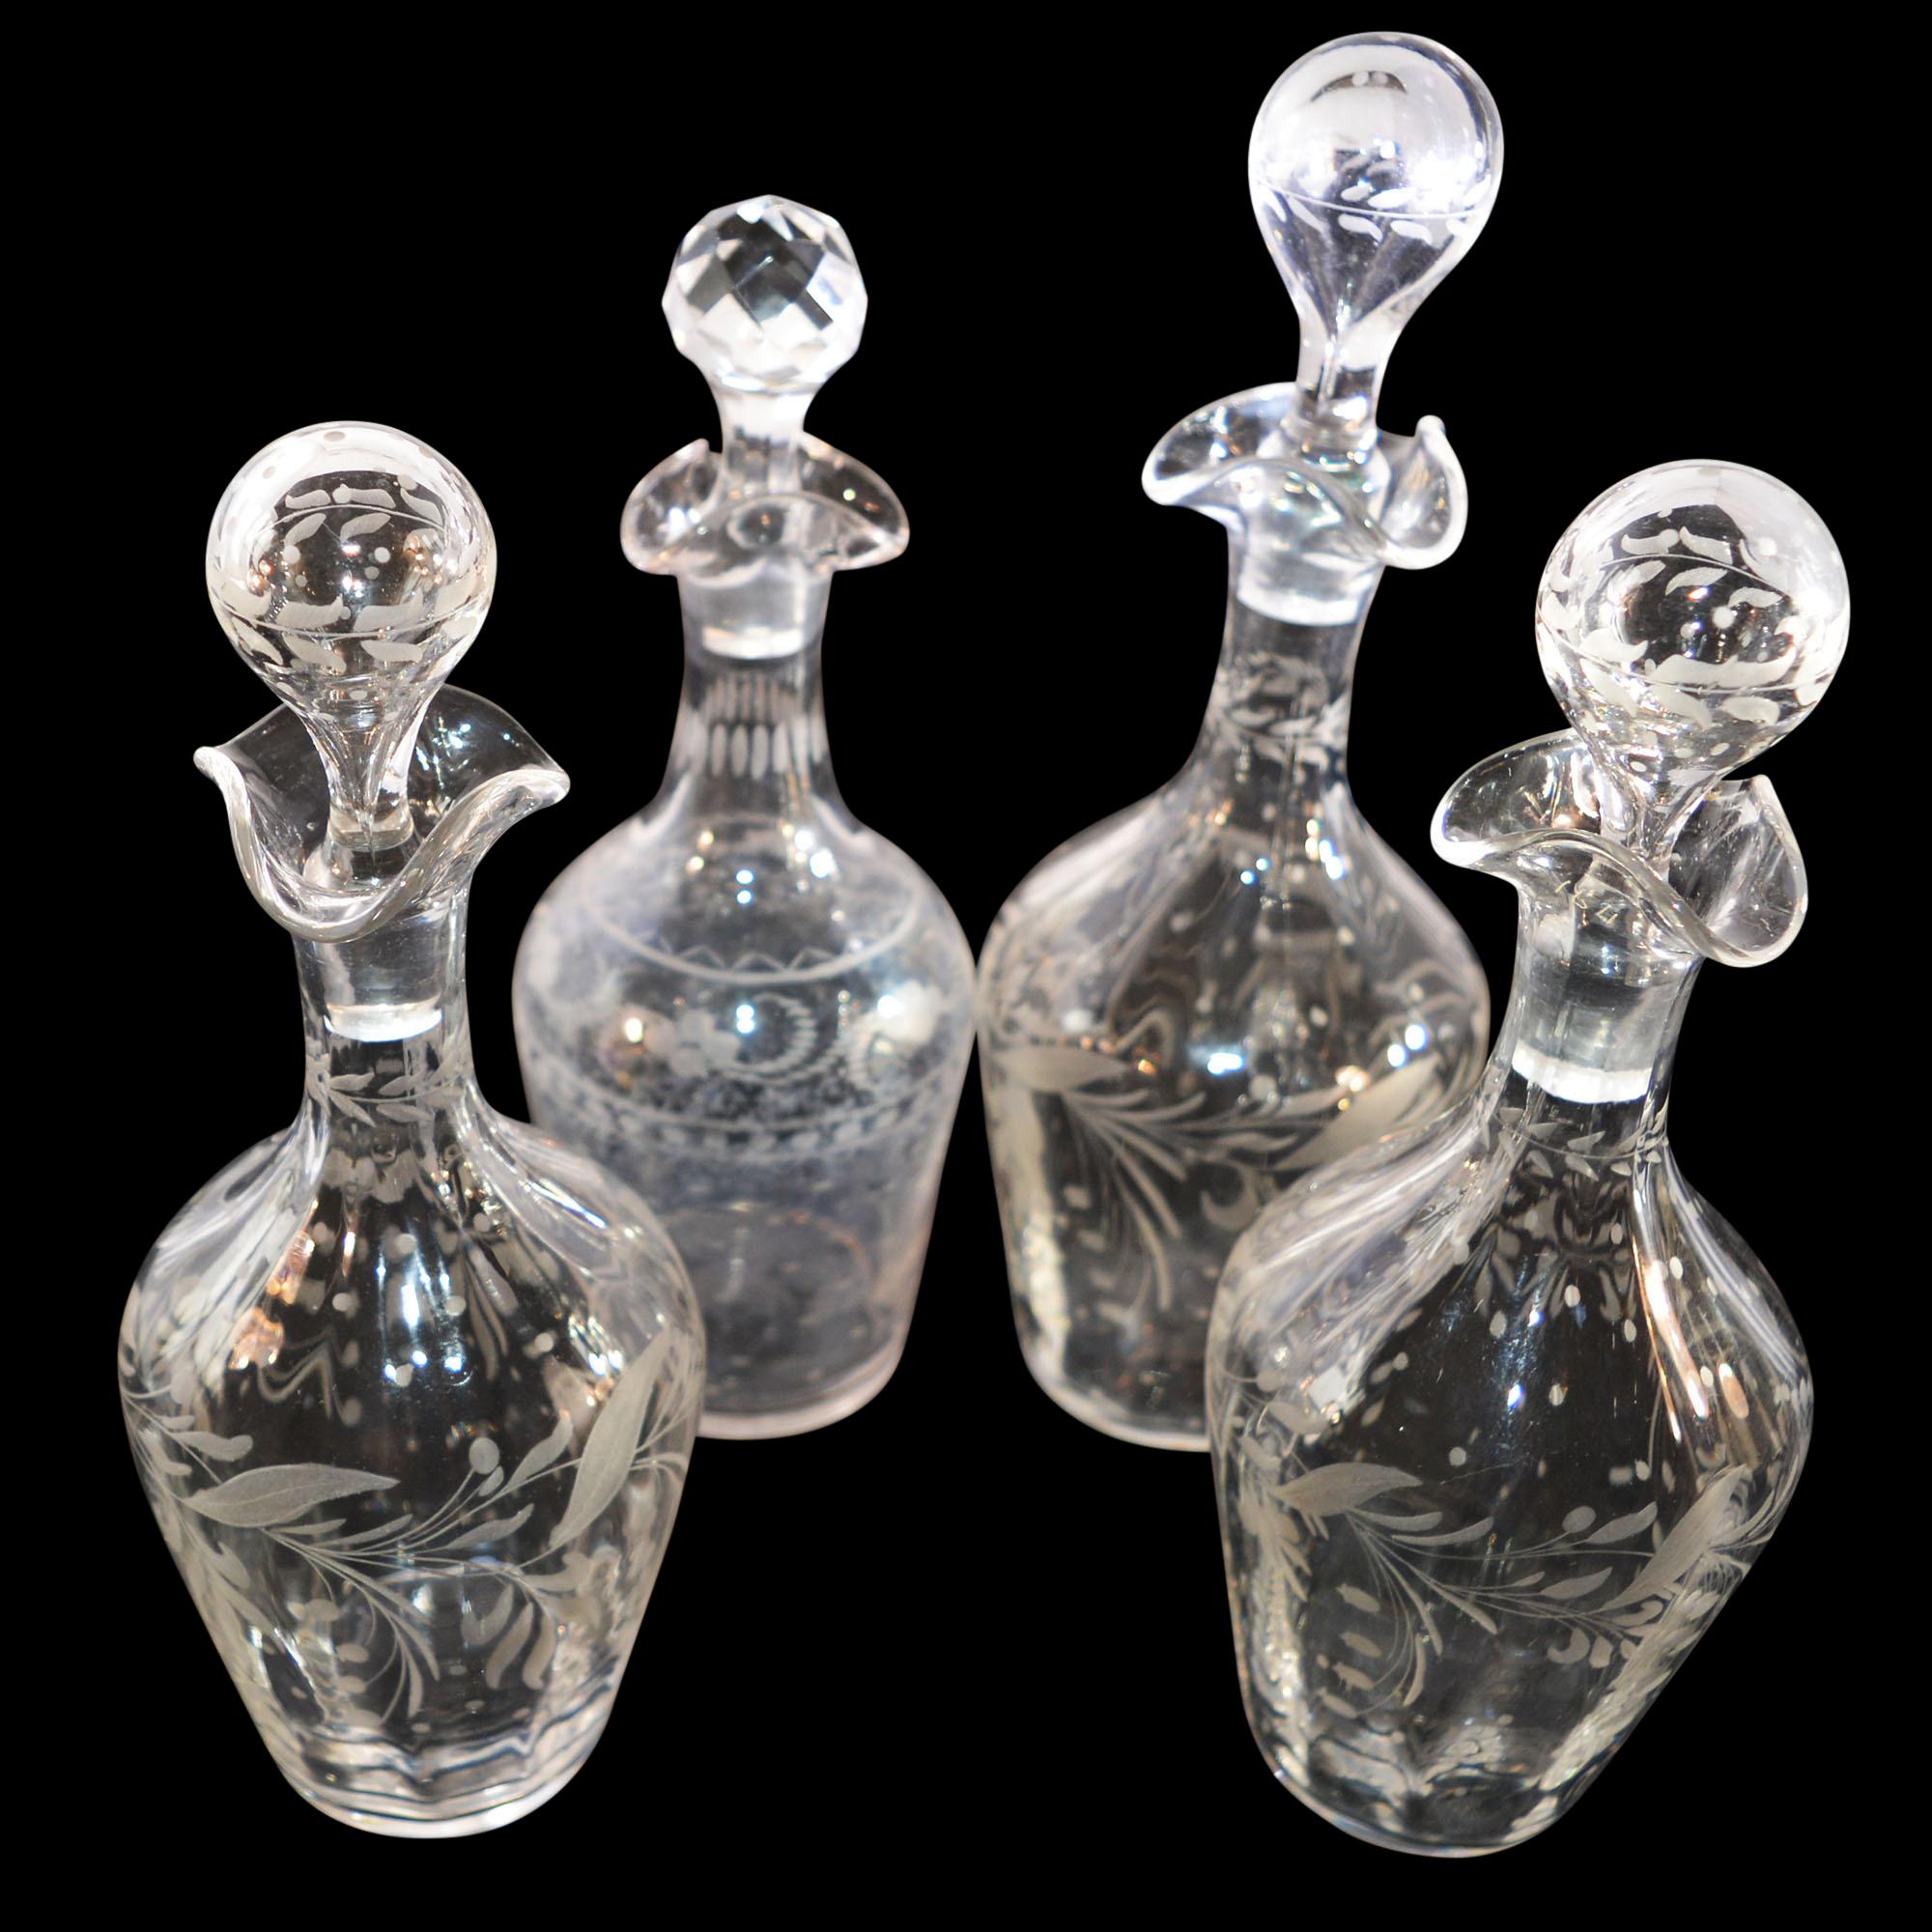 19th Century French Napoleon III Ebony and Rosewood Cave à Liqueur Tantalus Bohemian Glass